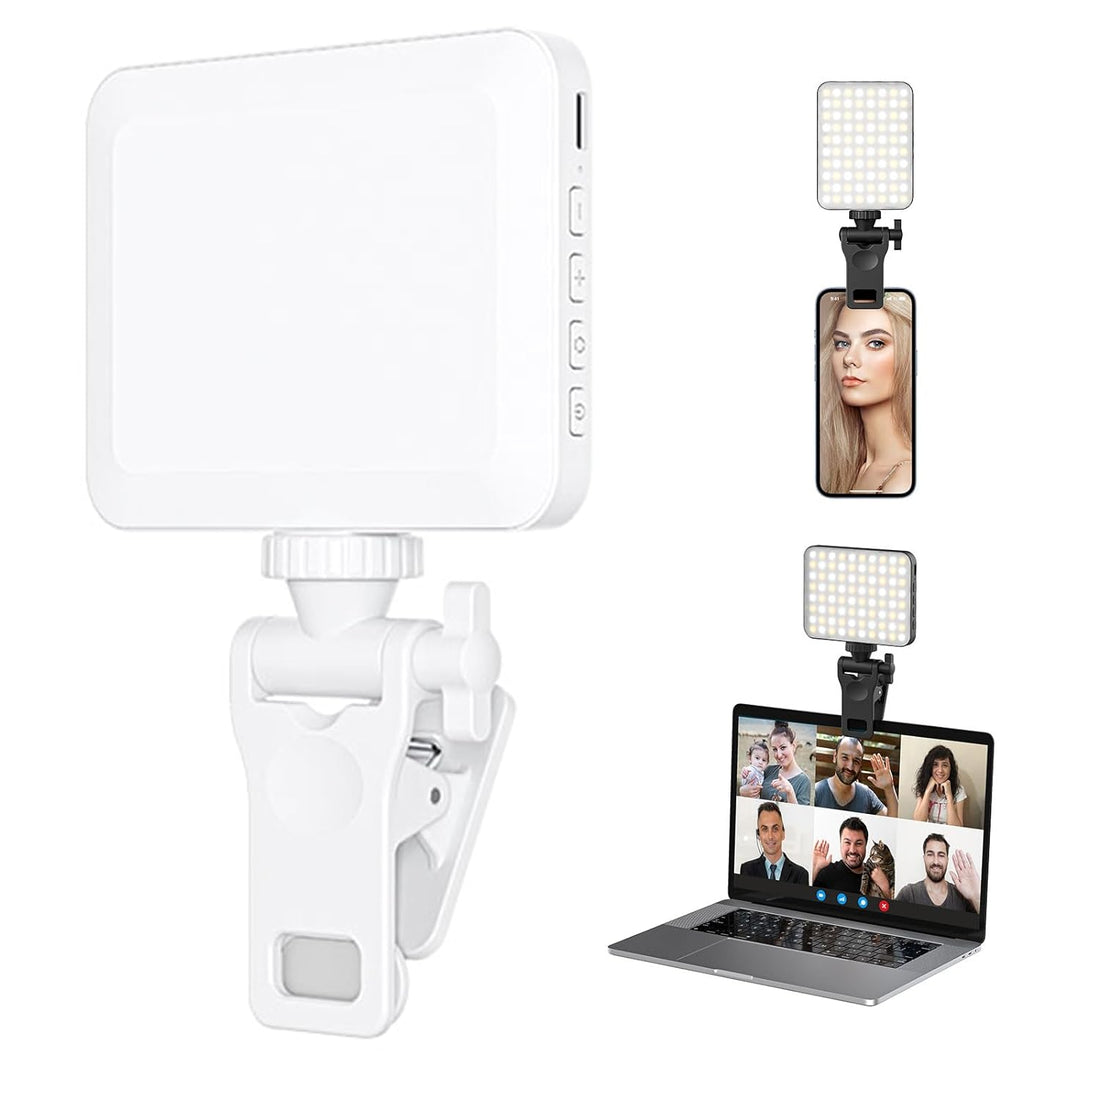 XINBAOHONG Rechargeable Selfie Light, Clip Fill Light for Phone Laptop Tablet Portable Light for Video Conference Live Streaming Zoom Call Makeup Picture (White)